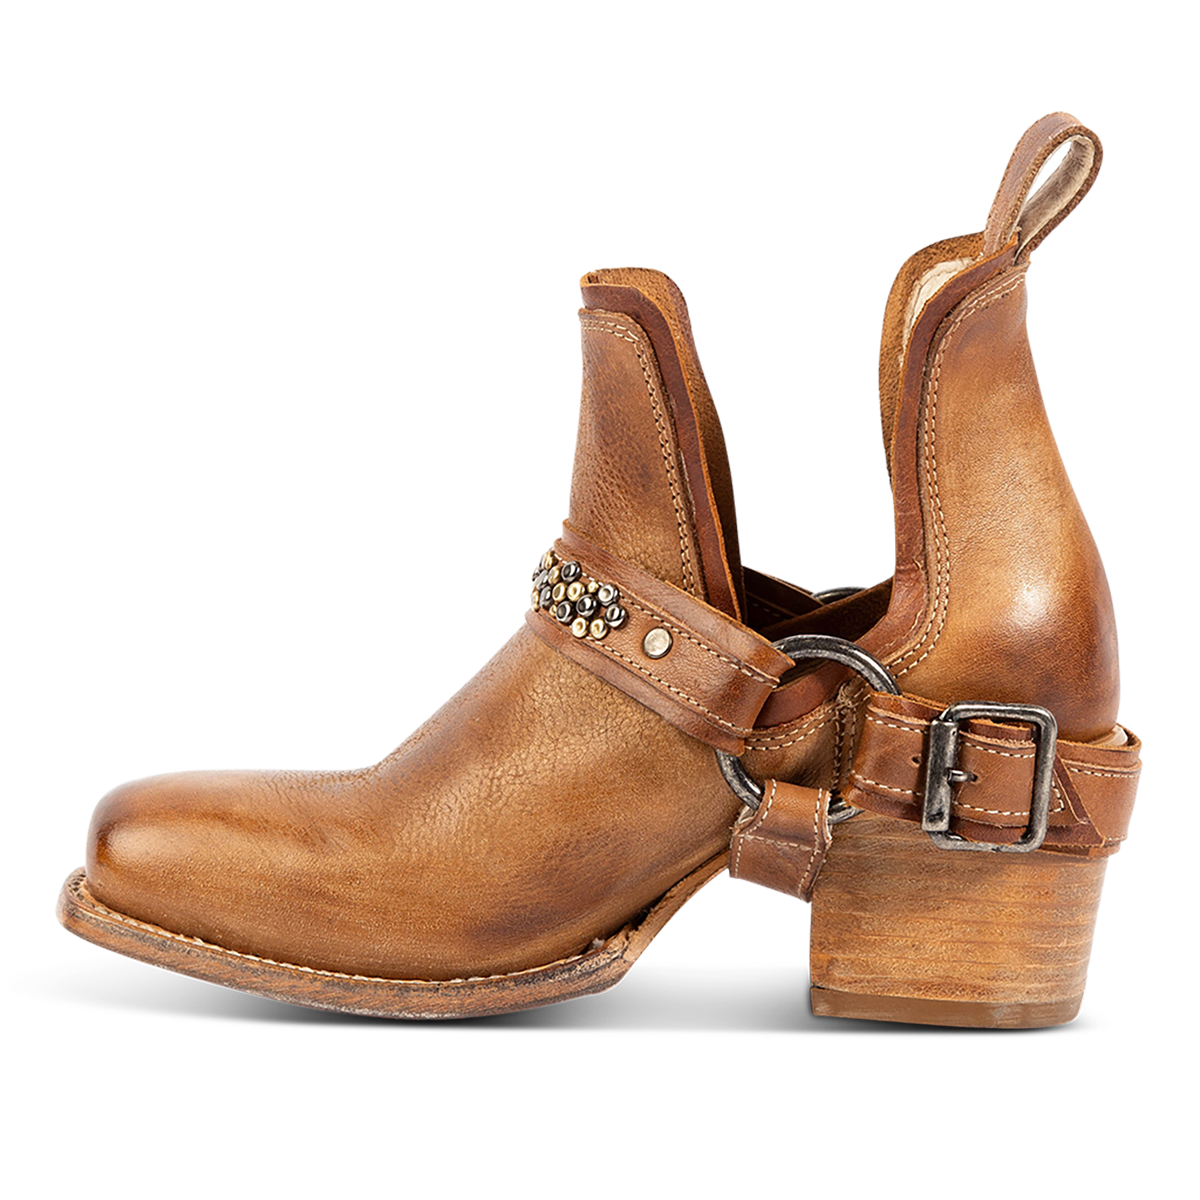 Inside view showing FREEBIRD women's Dusty wheat multi bootie with studded embellishments, an ankle harness and a slip on leather pull strap